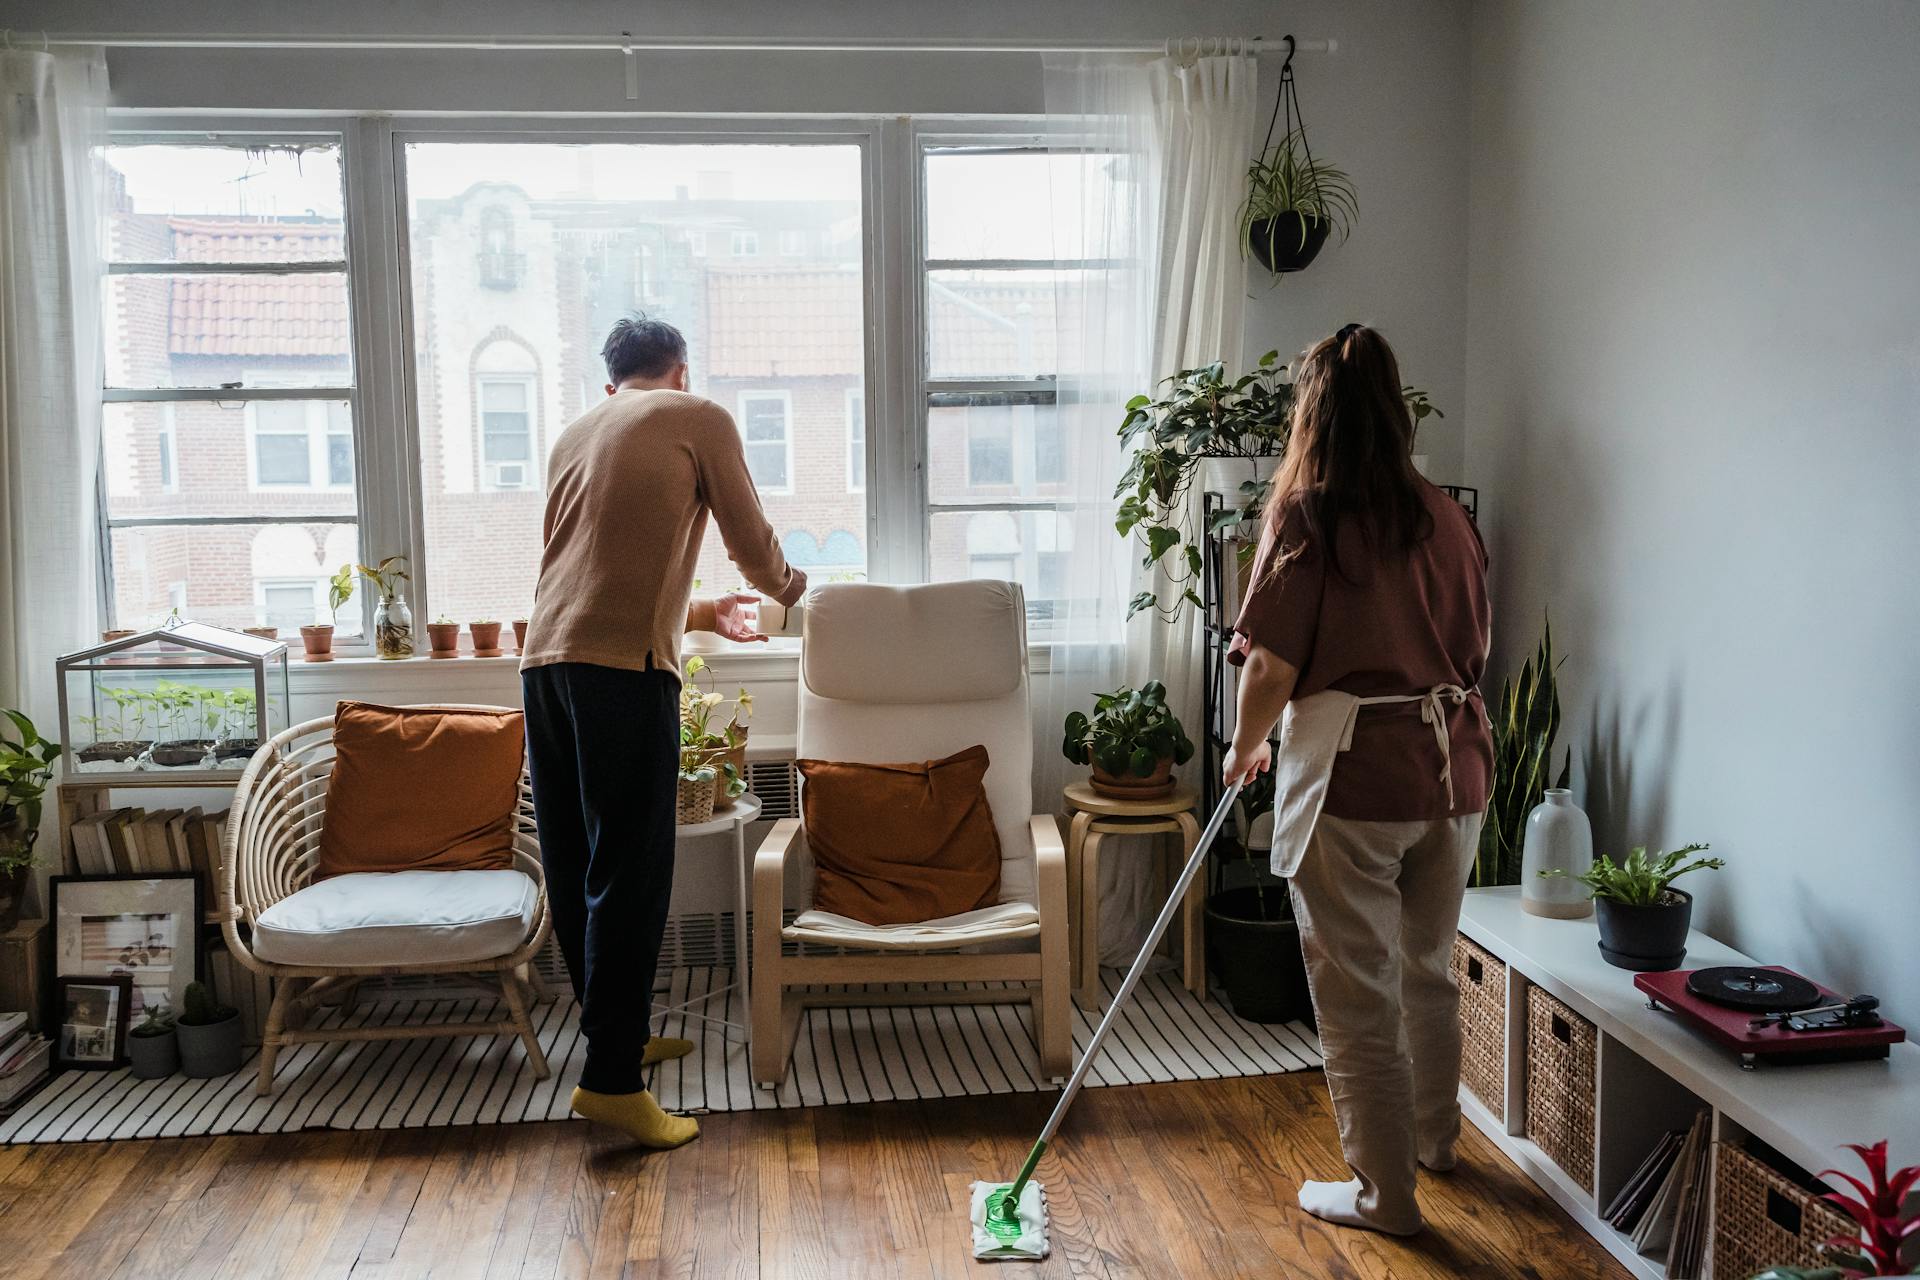 A couple cleaning | Source: Pexels